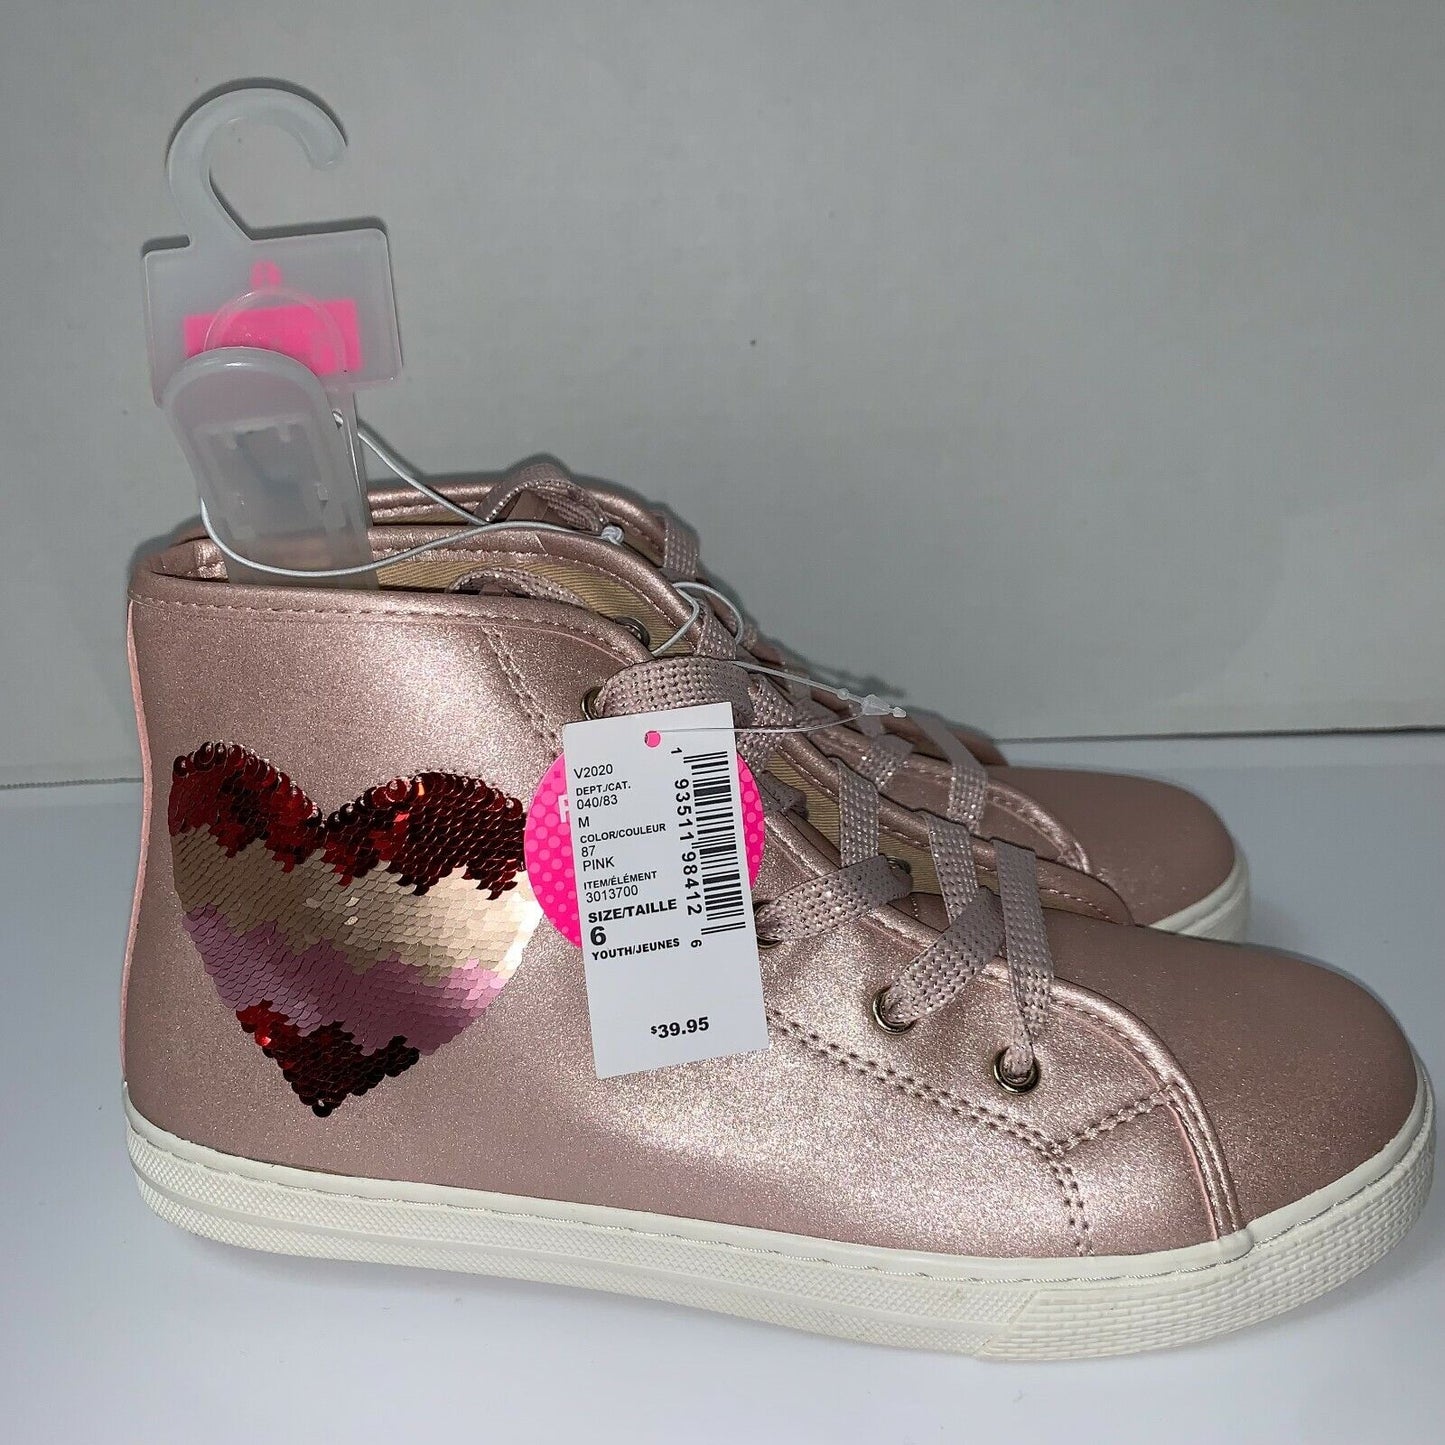 NEW Children's Place Sneakers Pink, Glitter Girl's Sz 6